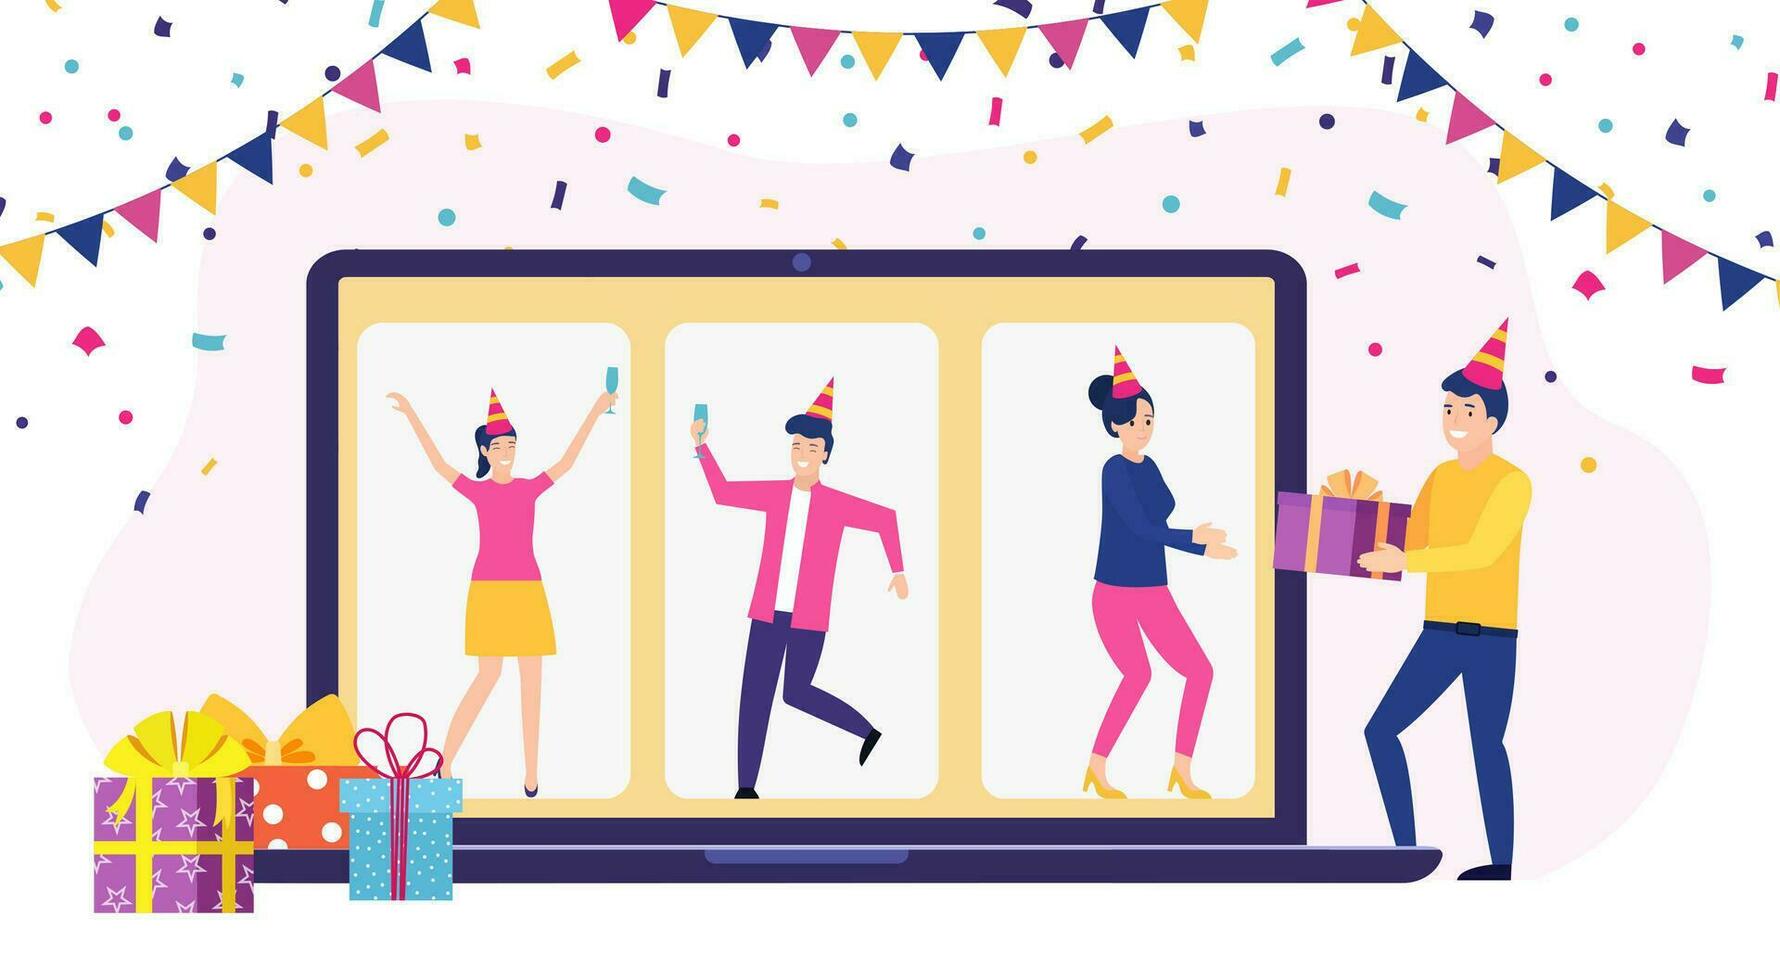 Online party, birthday, meeting friends. People drink wine together in quarantine. Video chat. Birthday party web camera and online holiday. Vector illustration in flat style